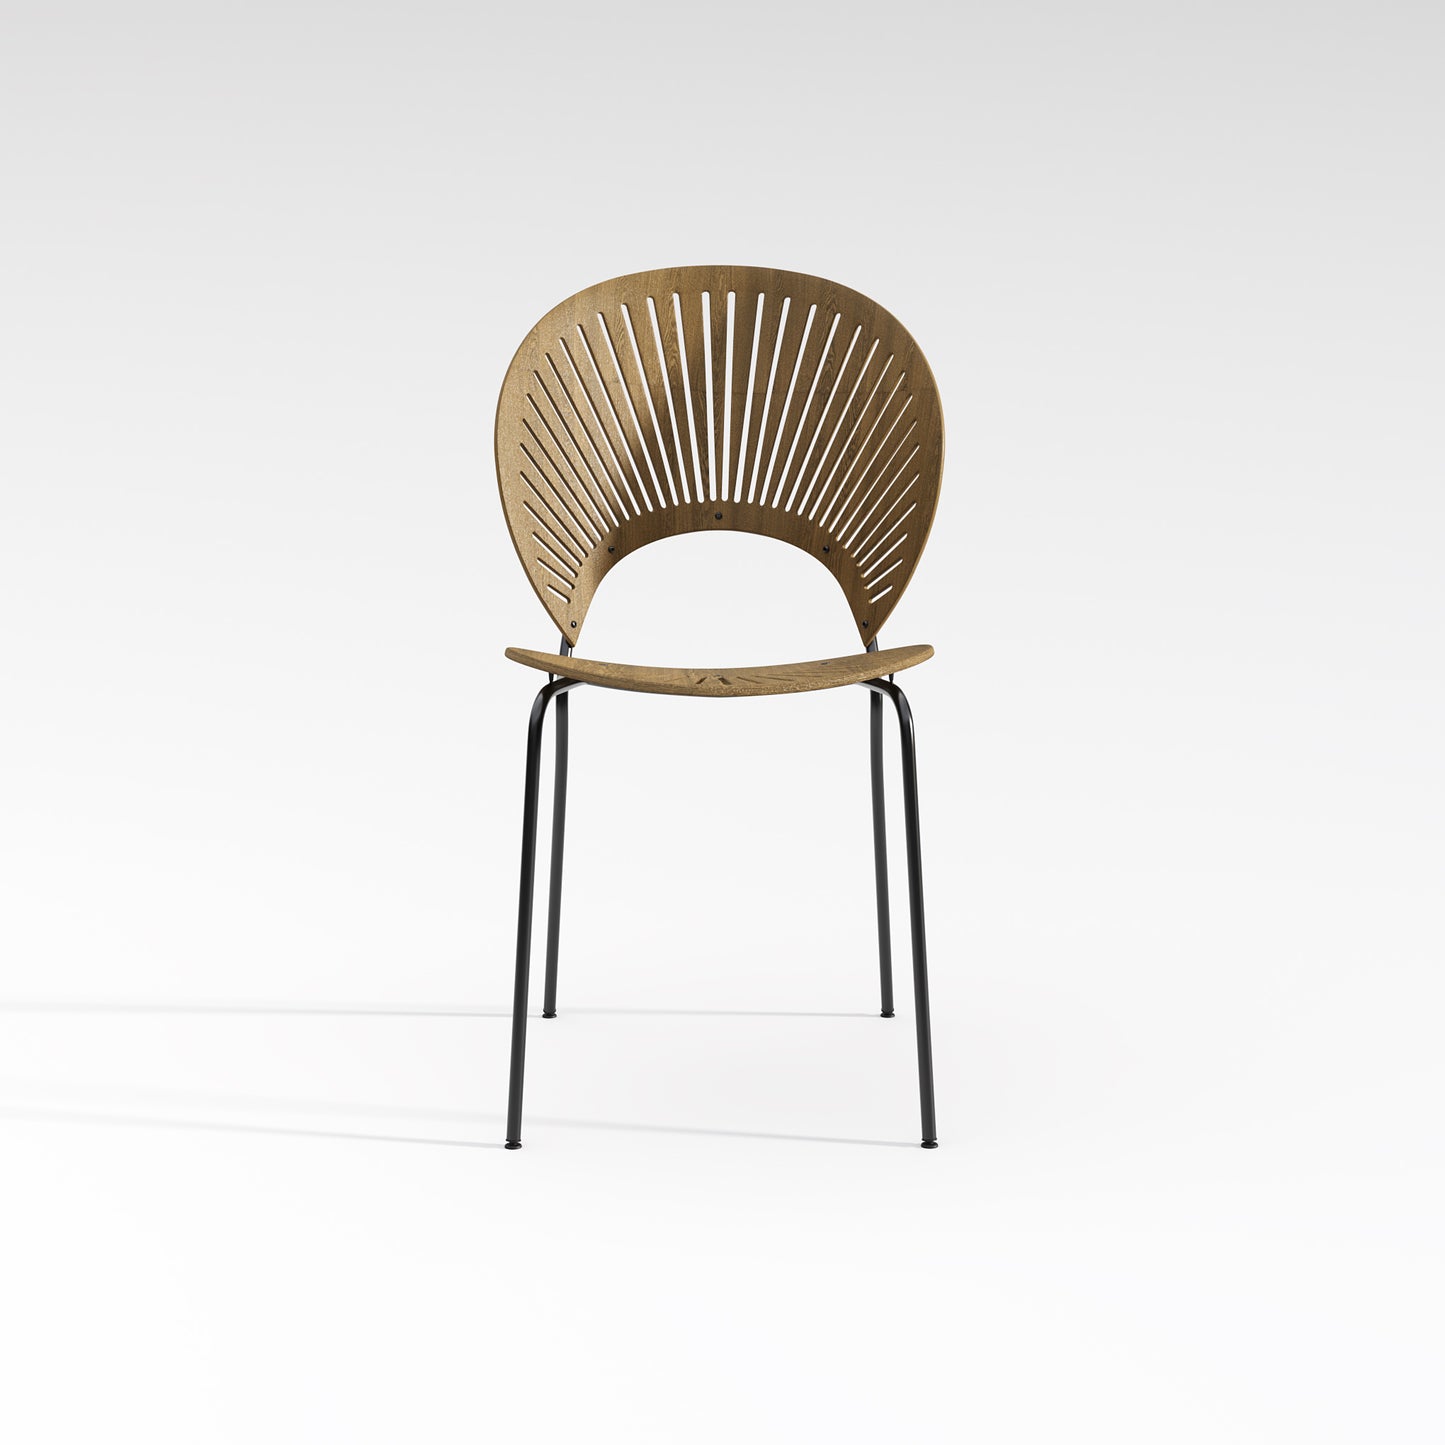 CIRCULAR FAN Wabi-Sabi Design Dining Chair Steel Frame And Legs With Solid Timber Seat